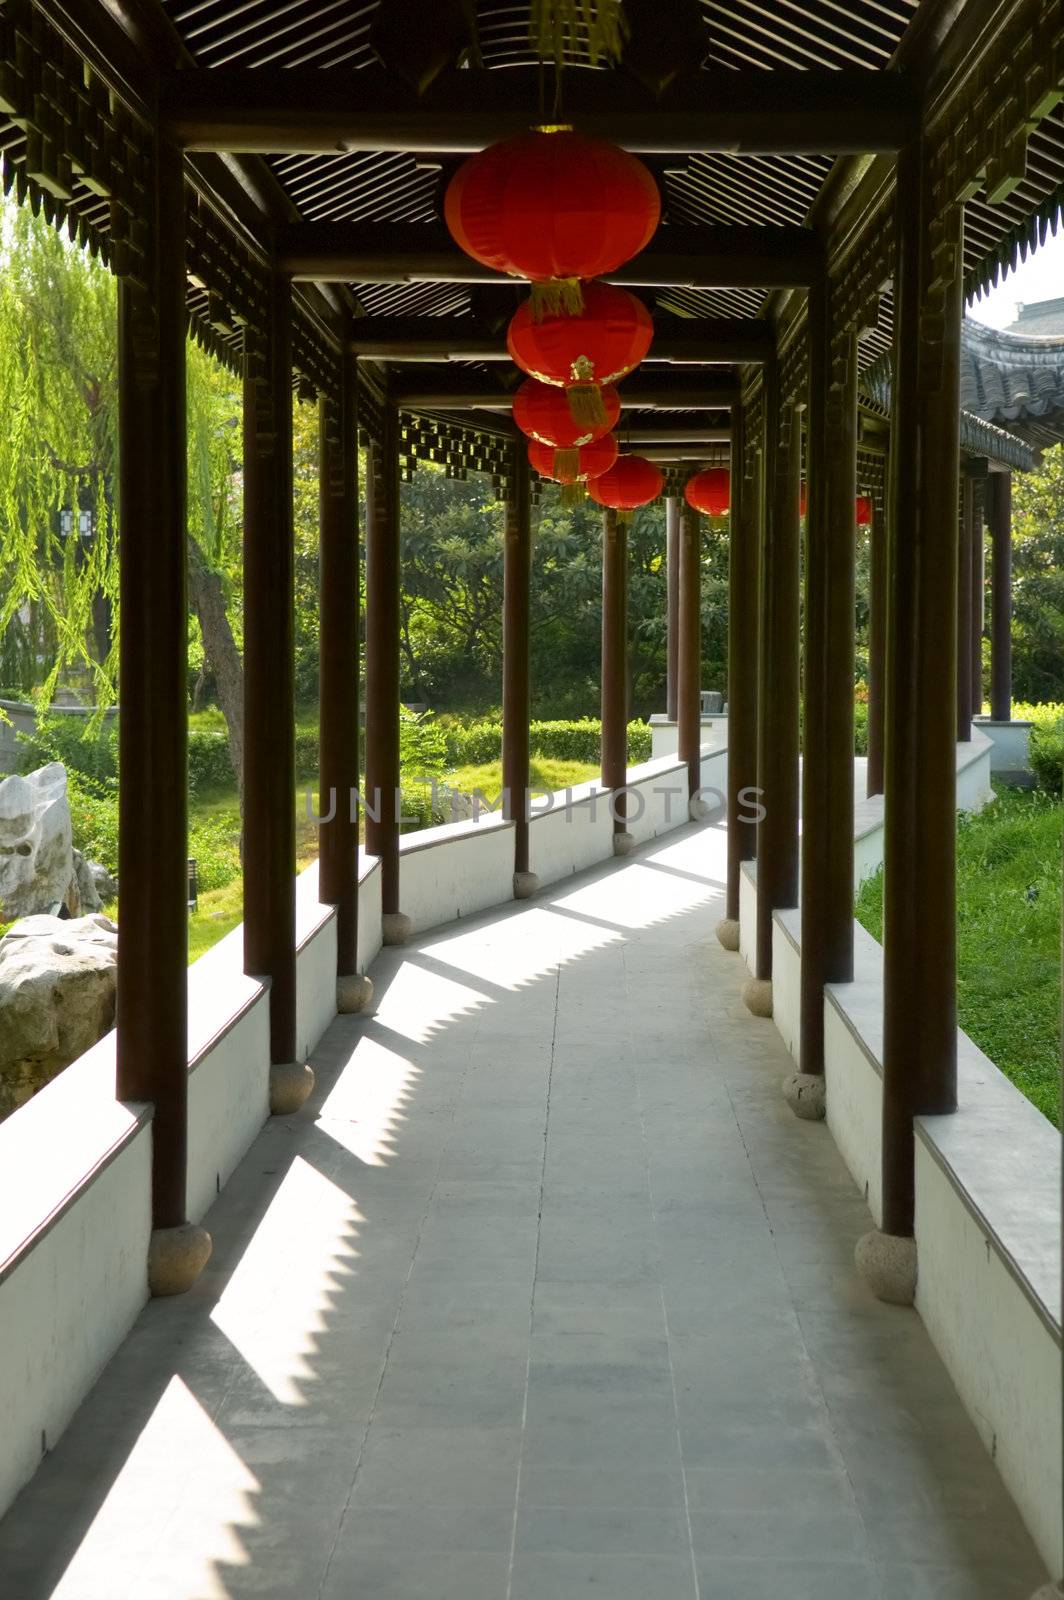 Beautiful traditional chinese wooden corridor structure with lanterns